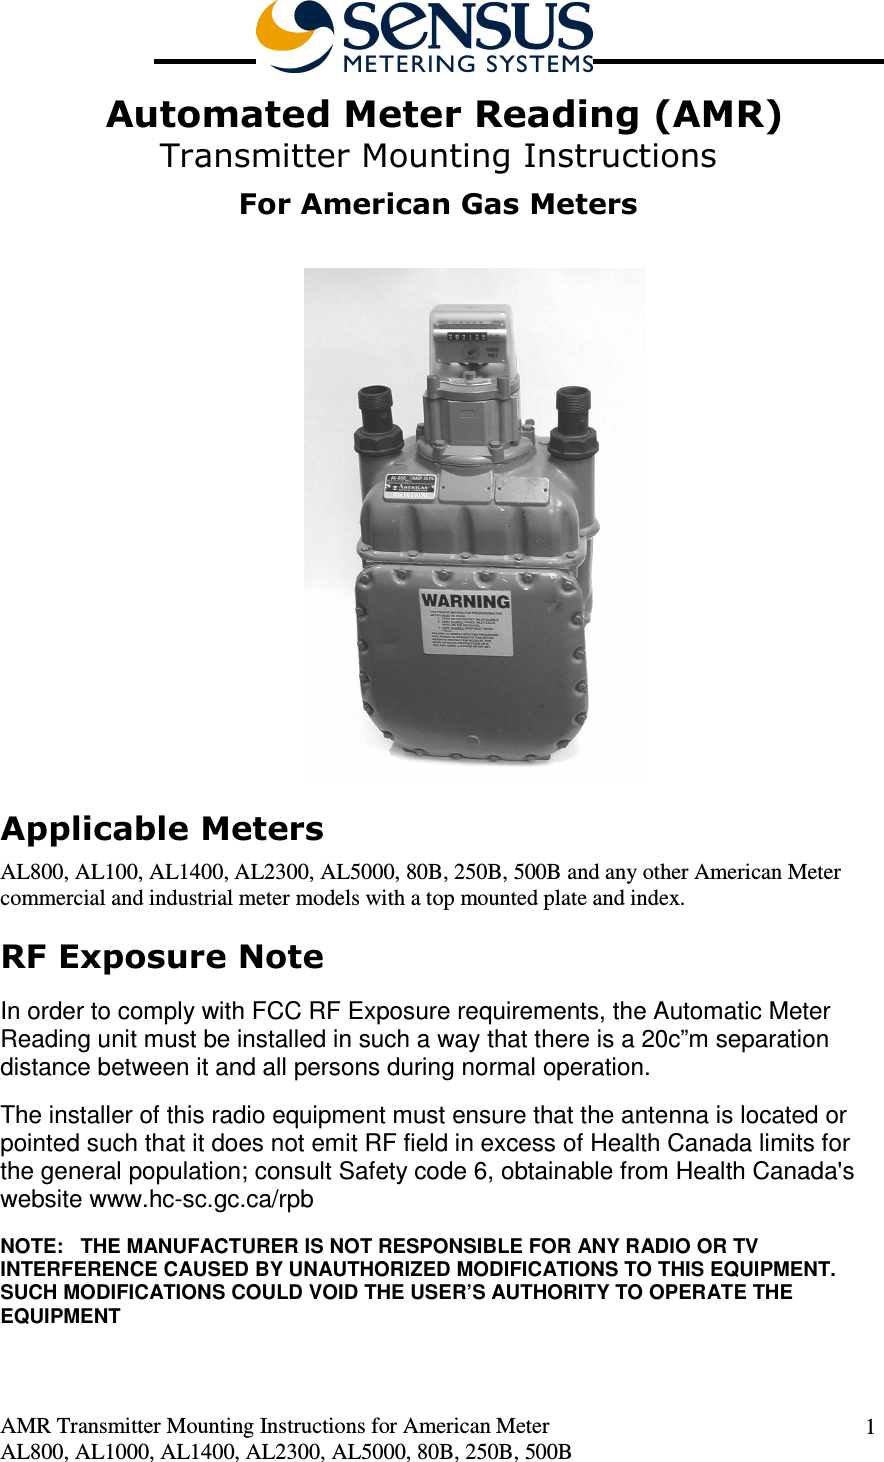  AMR Transmitter Mounting Instructions for American Meter AL800, AL1000, AL1400, AL2300, AL5000, 80B, 250B, 500B 1  Automated Meter Reading (AMR) Transmitter Mounting Instructions  For American Gas Meters   Applicable Meters AL800, AL100, AL1400, AL2300, AL5000, 80B, 250B, 500B and any other American Meter commercial and industrial meter models with a top mounted plate and index. RF Exposure Note  In order to comply with FCC RF Exposure requirements, the Automatic Meter Reading unit must be installed in such a way that there is a 20c”m separation distance between it and all persons during normal operation. The installer of this radio equipment must ensure that the antenna is located or pointed such that it does not emit RF field in excess of Health Canada limits for the general population; consult Safety code 6, obtainable from Health Canada&apos;s website www.hc-sc.gc.ca/rpb NOTE:   THE MANUFACTURER IS NOT RESPONSIBLE FOR ANY RADIO OR TV INTERFERENCE CAUSED BY UNAUTHORIZED MODIFICATIONS TO THIS EQUIPMENT.  SUCH MODIFICATIONS COULD VOID THE USER’S AUTHORITY TO OPERATE THE EQUIPMENT